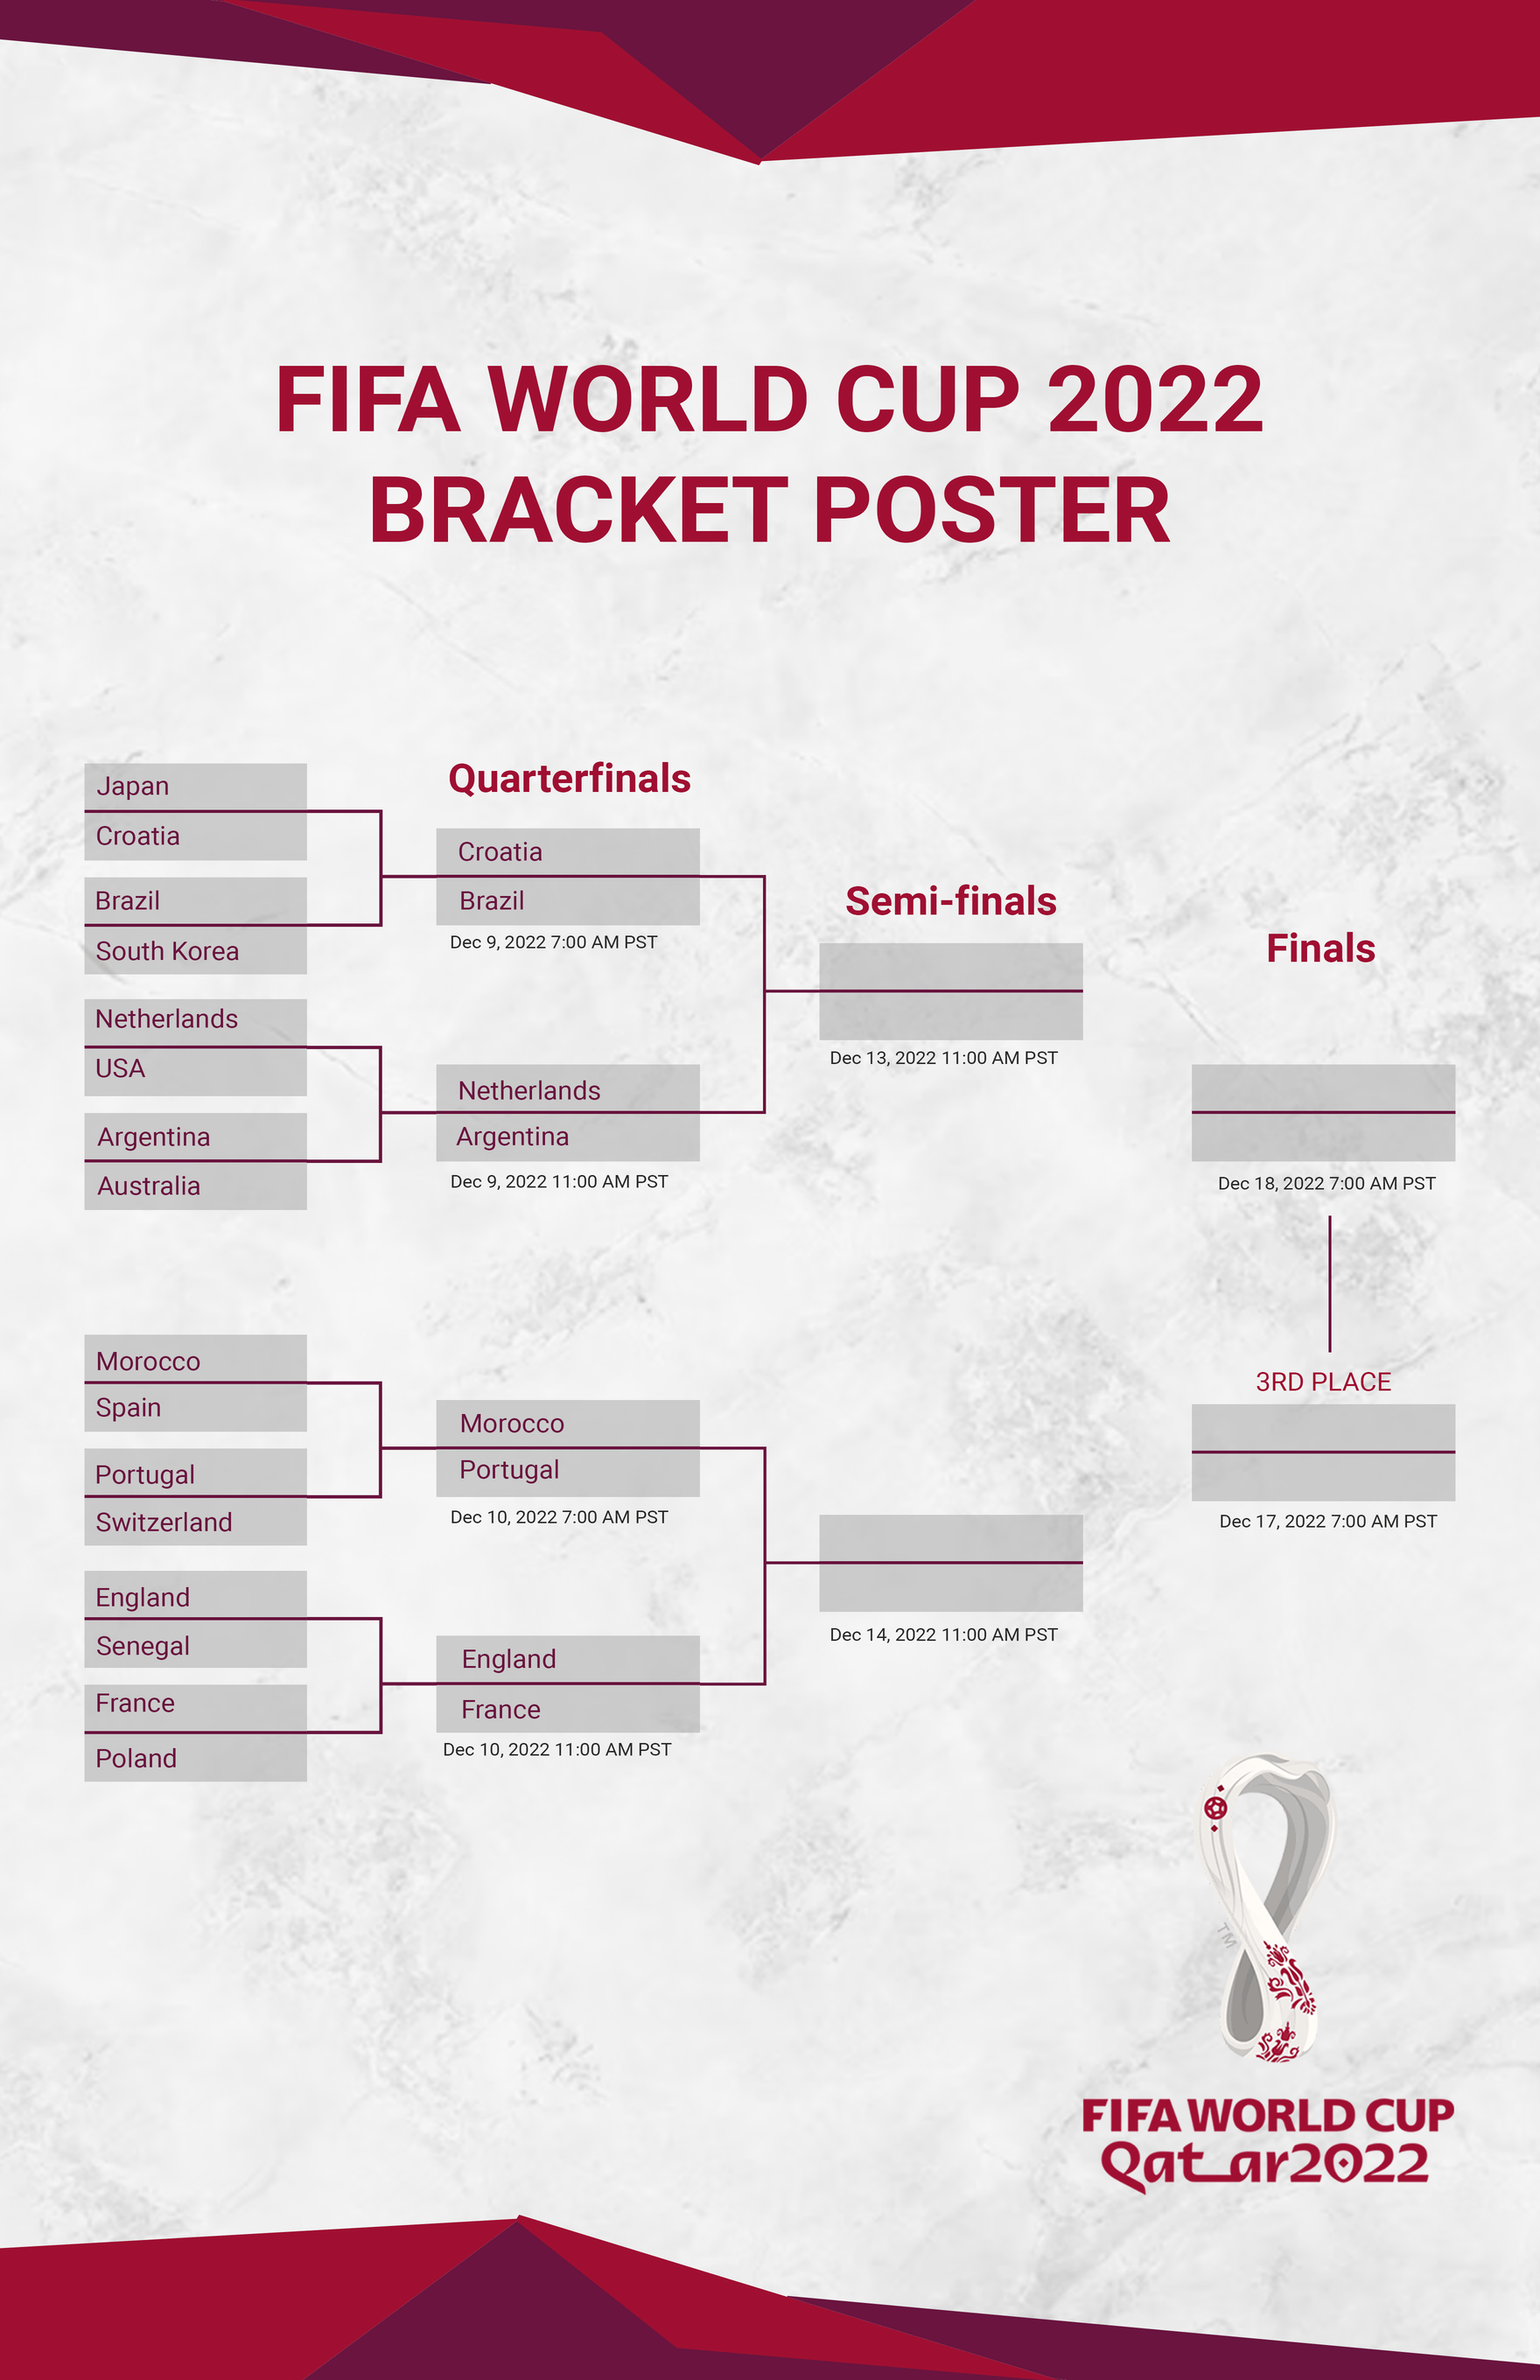 FIFA World Cup 2022 Bracket Poster